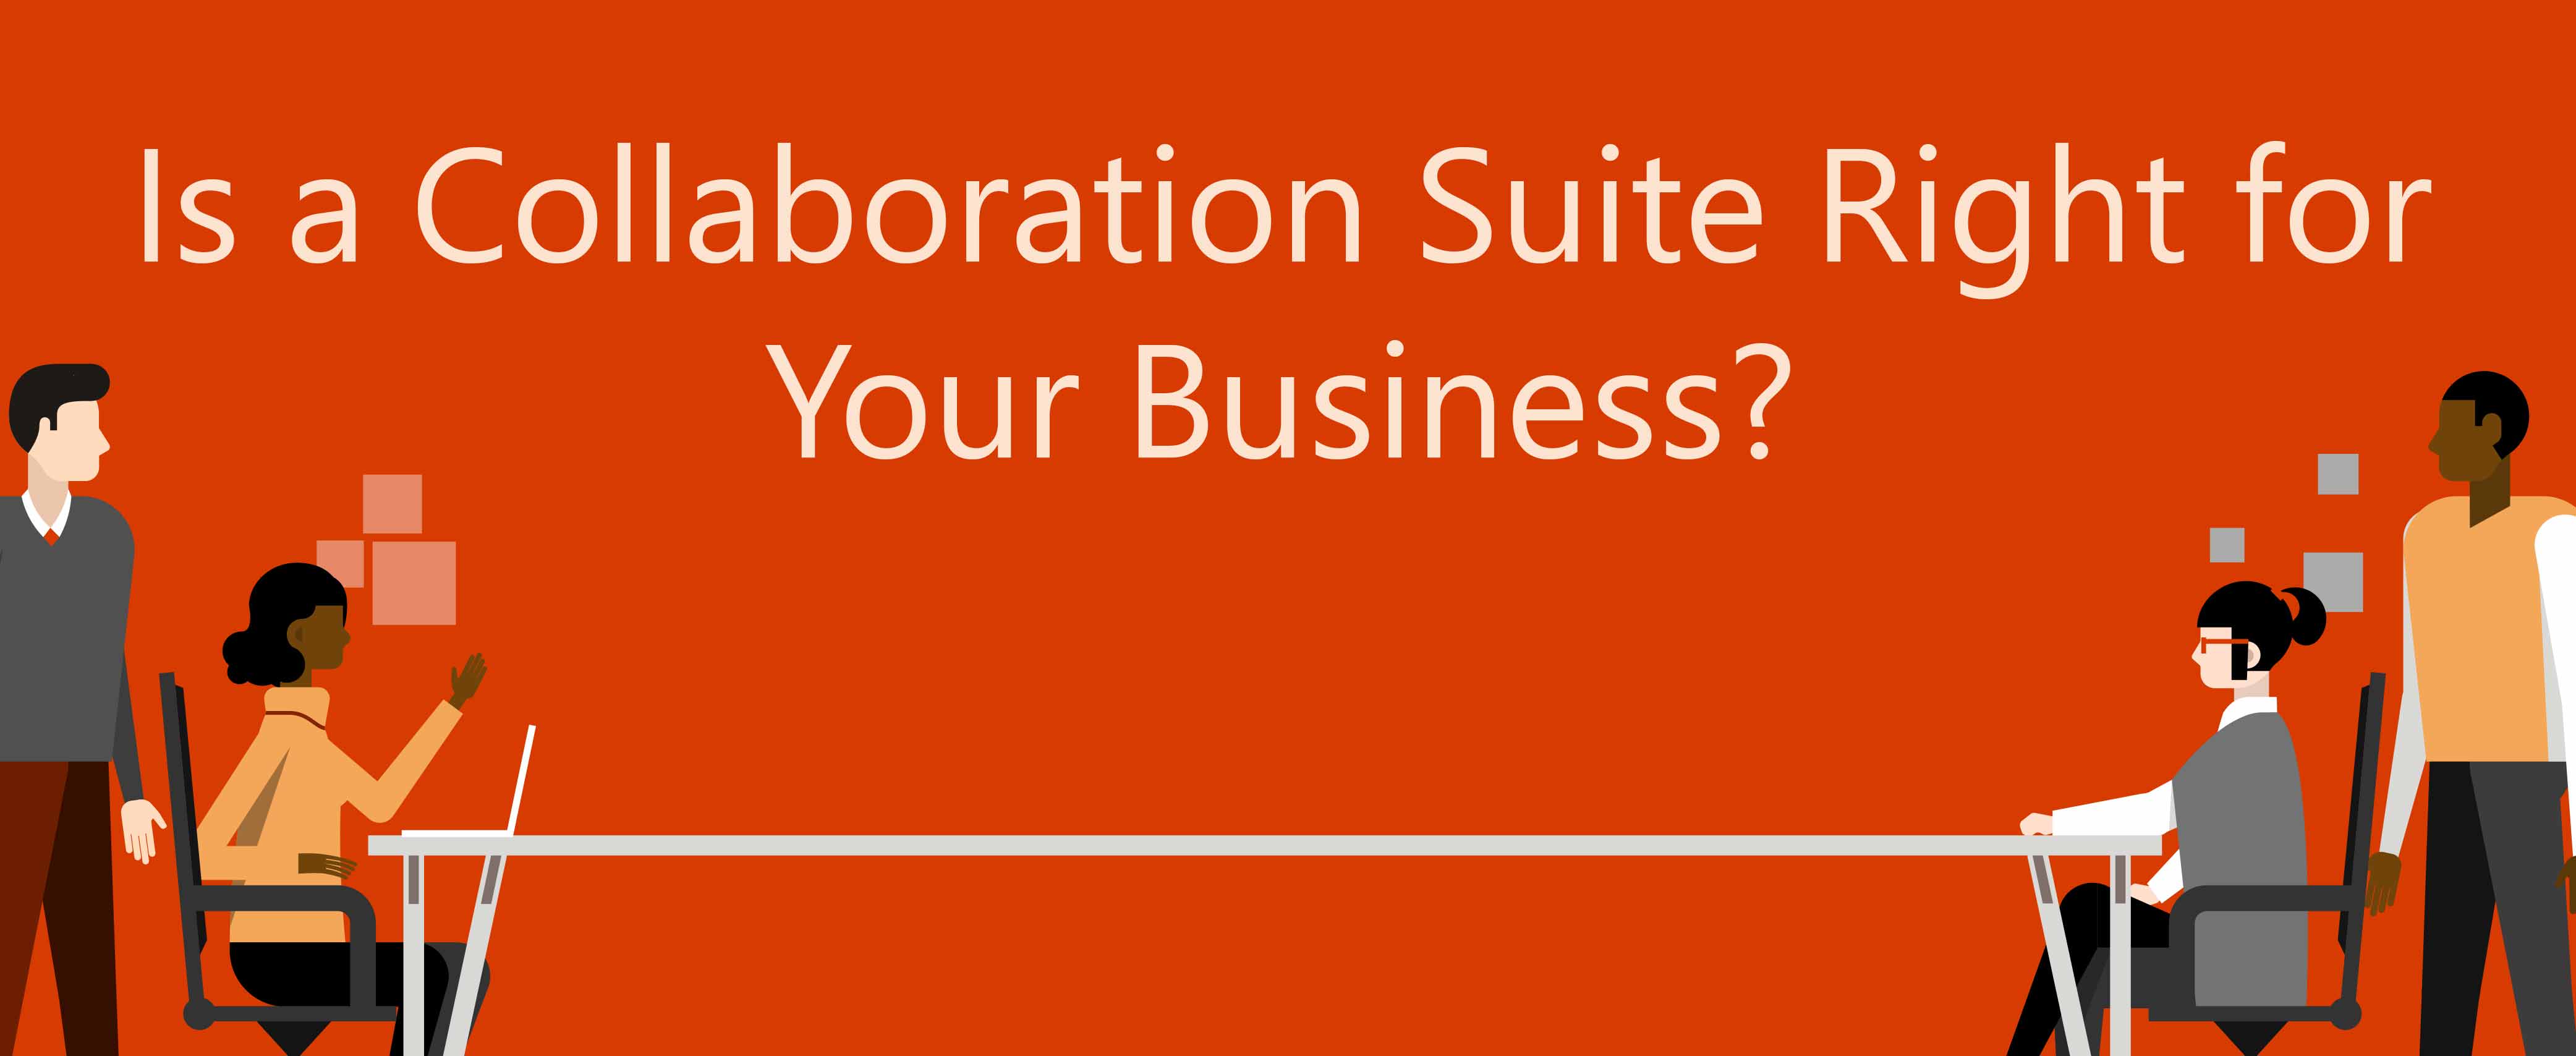 5 Reasons Your Business Should be Using a Collaboration Suite